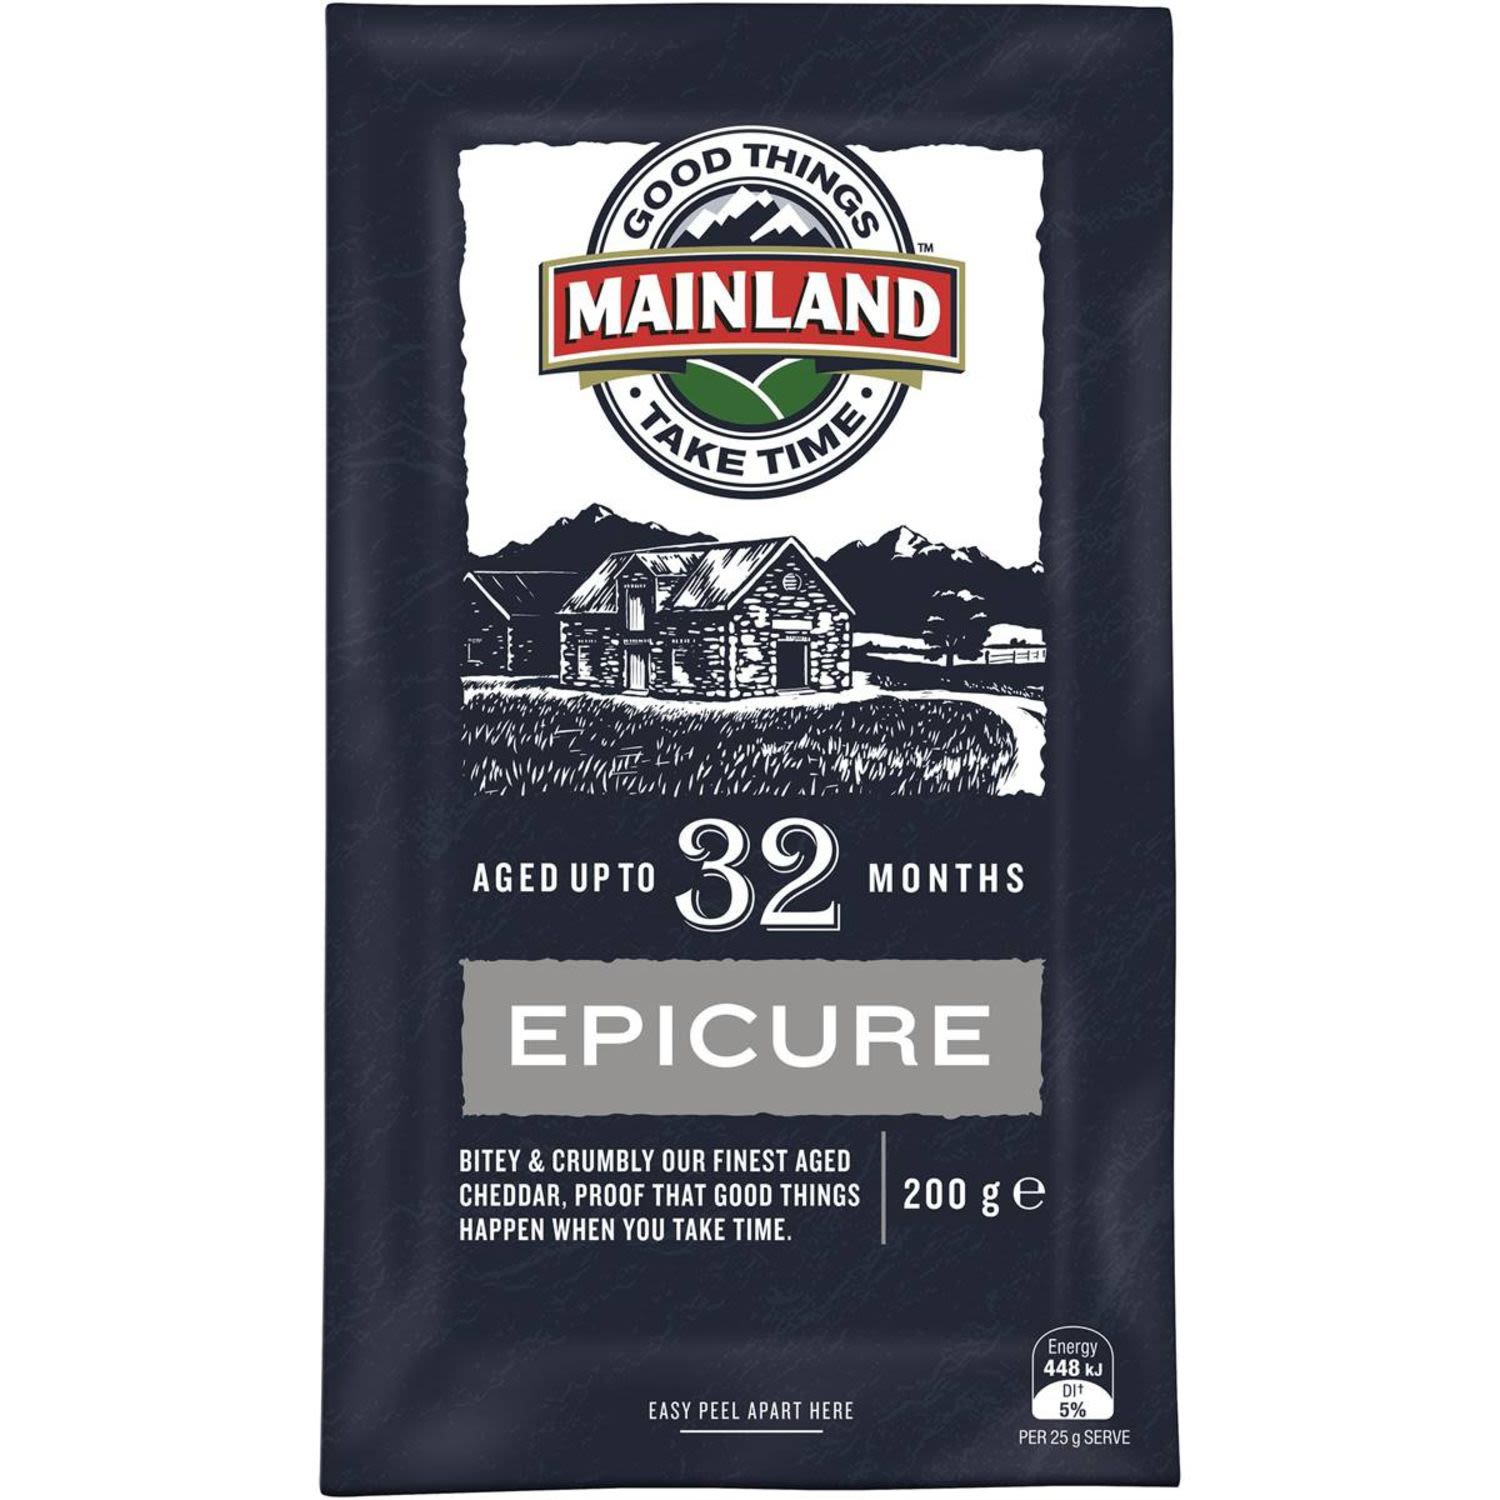 Mainland Epicure Cheddar Cheese Block, 200 Gram